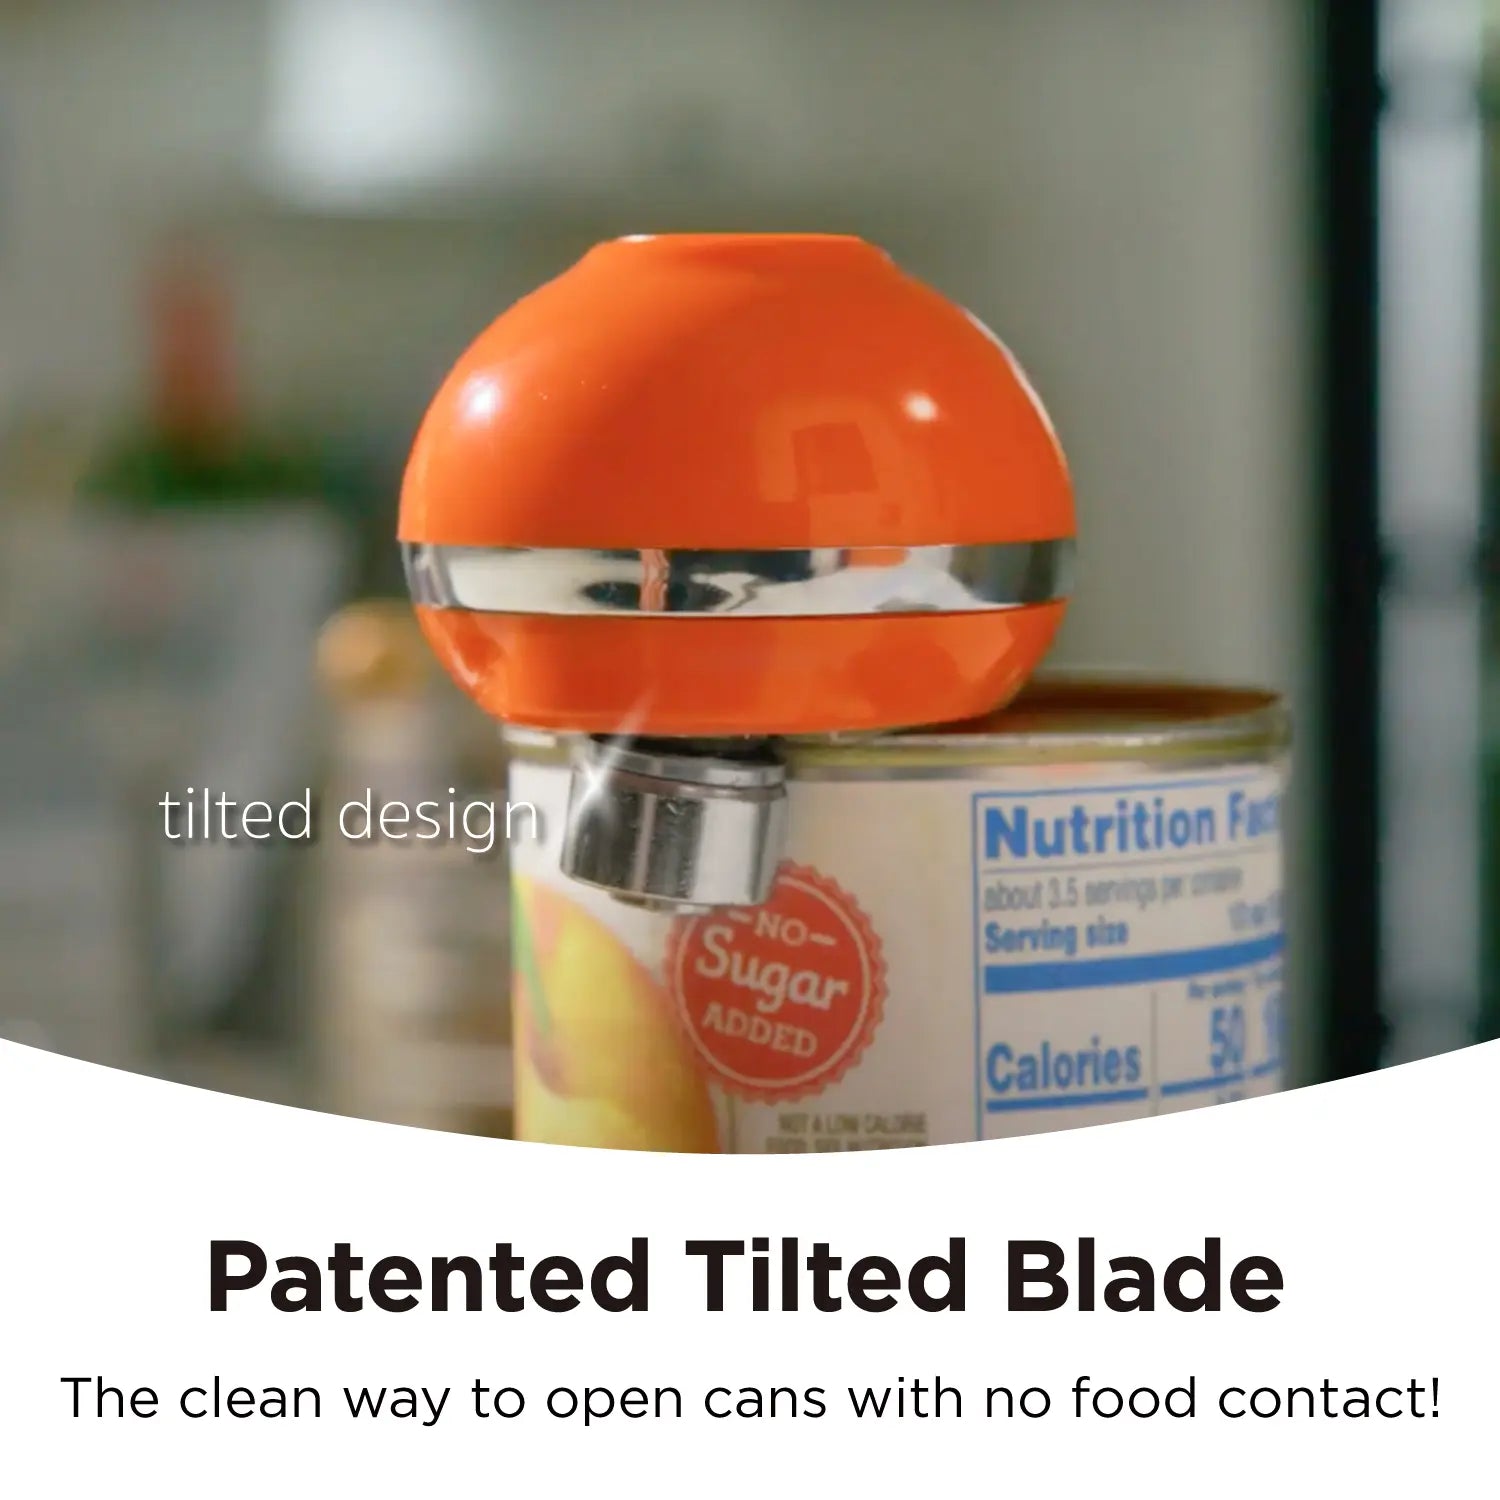 Mini Electric Can Opener - The Smallest Electric Can Opener, Orange, CO1200-O, Patented tiled blade, the clean way to open cans with no food contact, battery operated can openers top rated, can opener electric smooth edge, auto can openers, can electric opener, smooth edge electric can opener,portable can opener